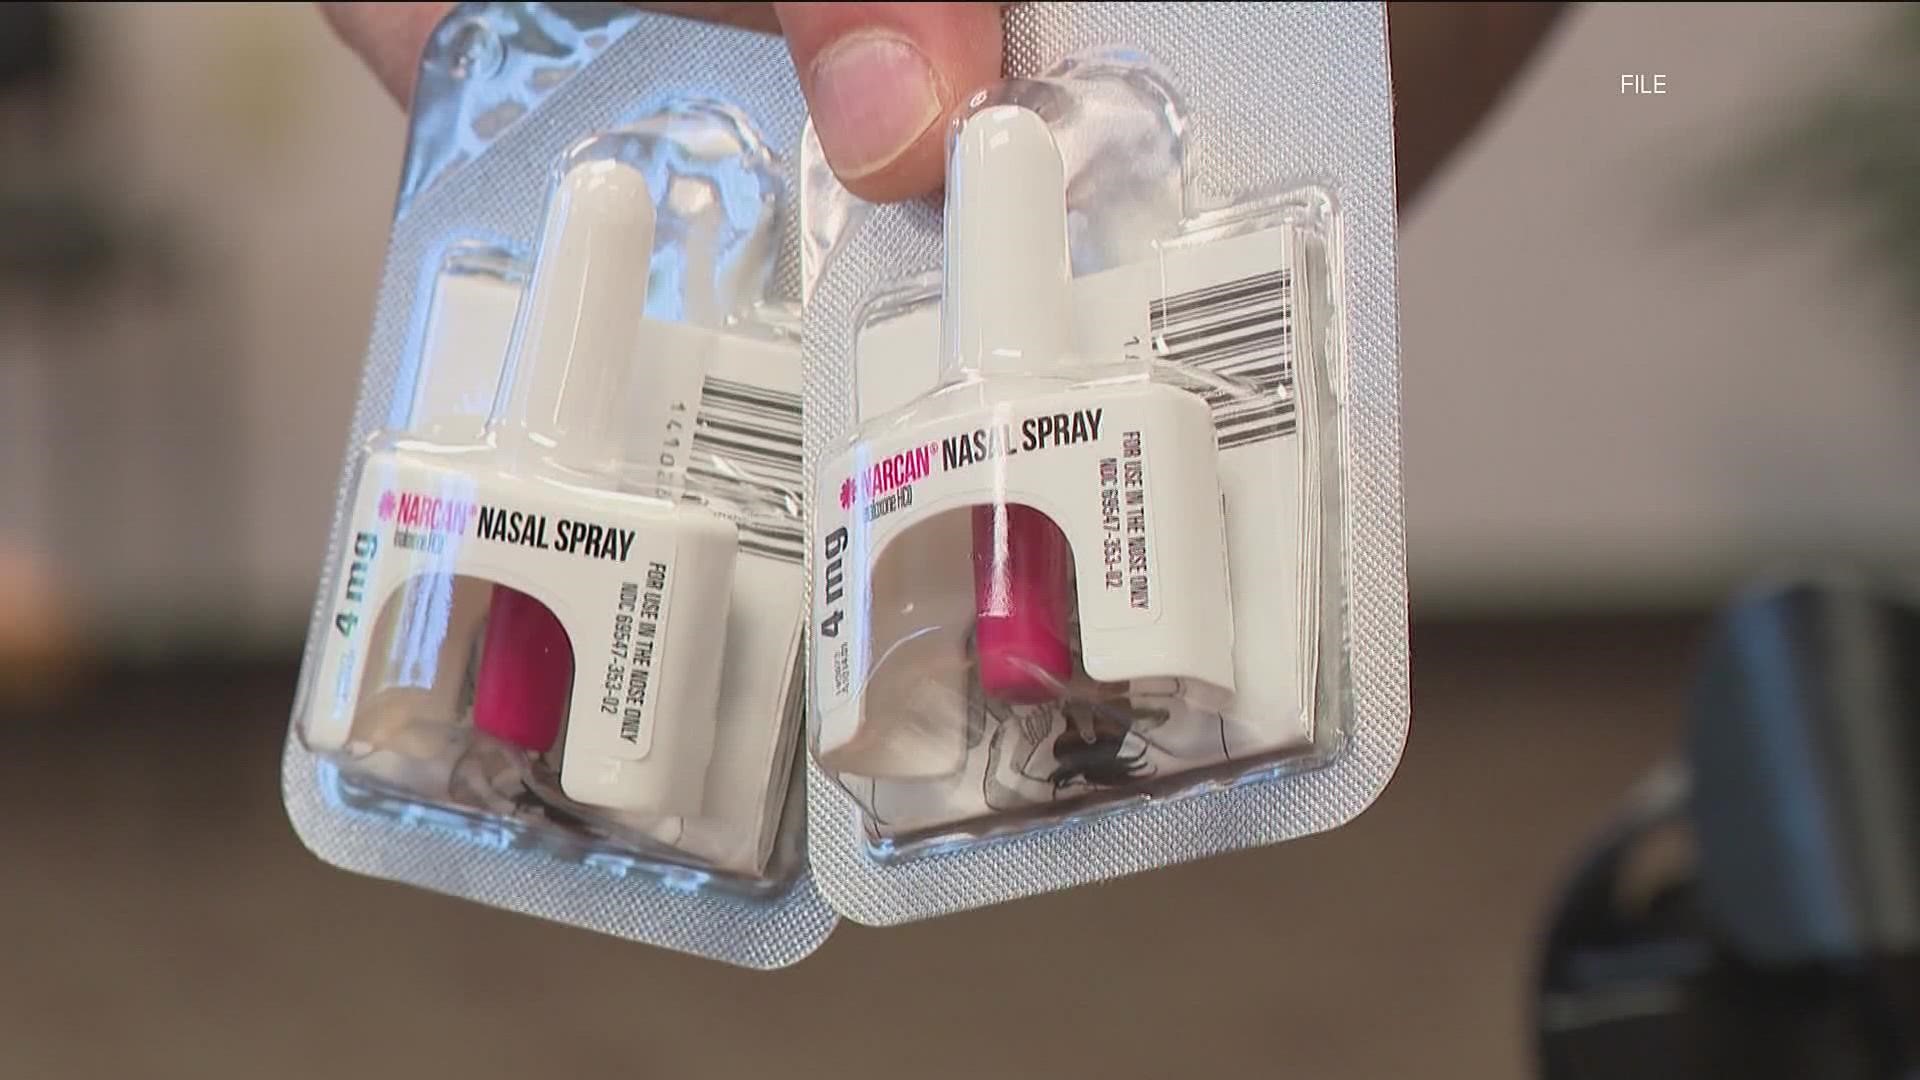 Narcan, or naloxone, can reverse the effects of an opioid overdose. 11Alive surveyed more than 15 school districts to find out which have the medication on hand.